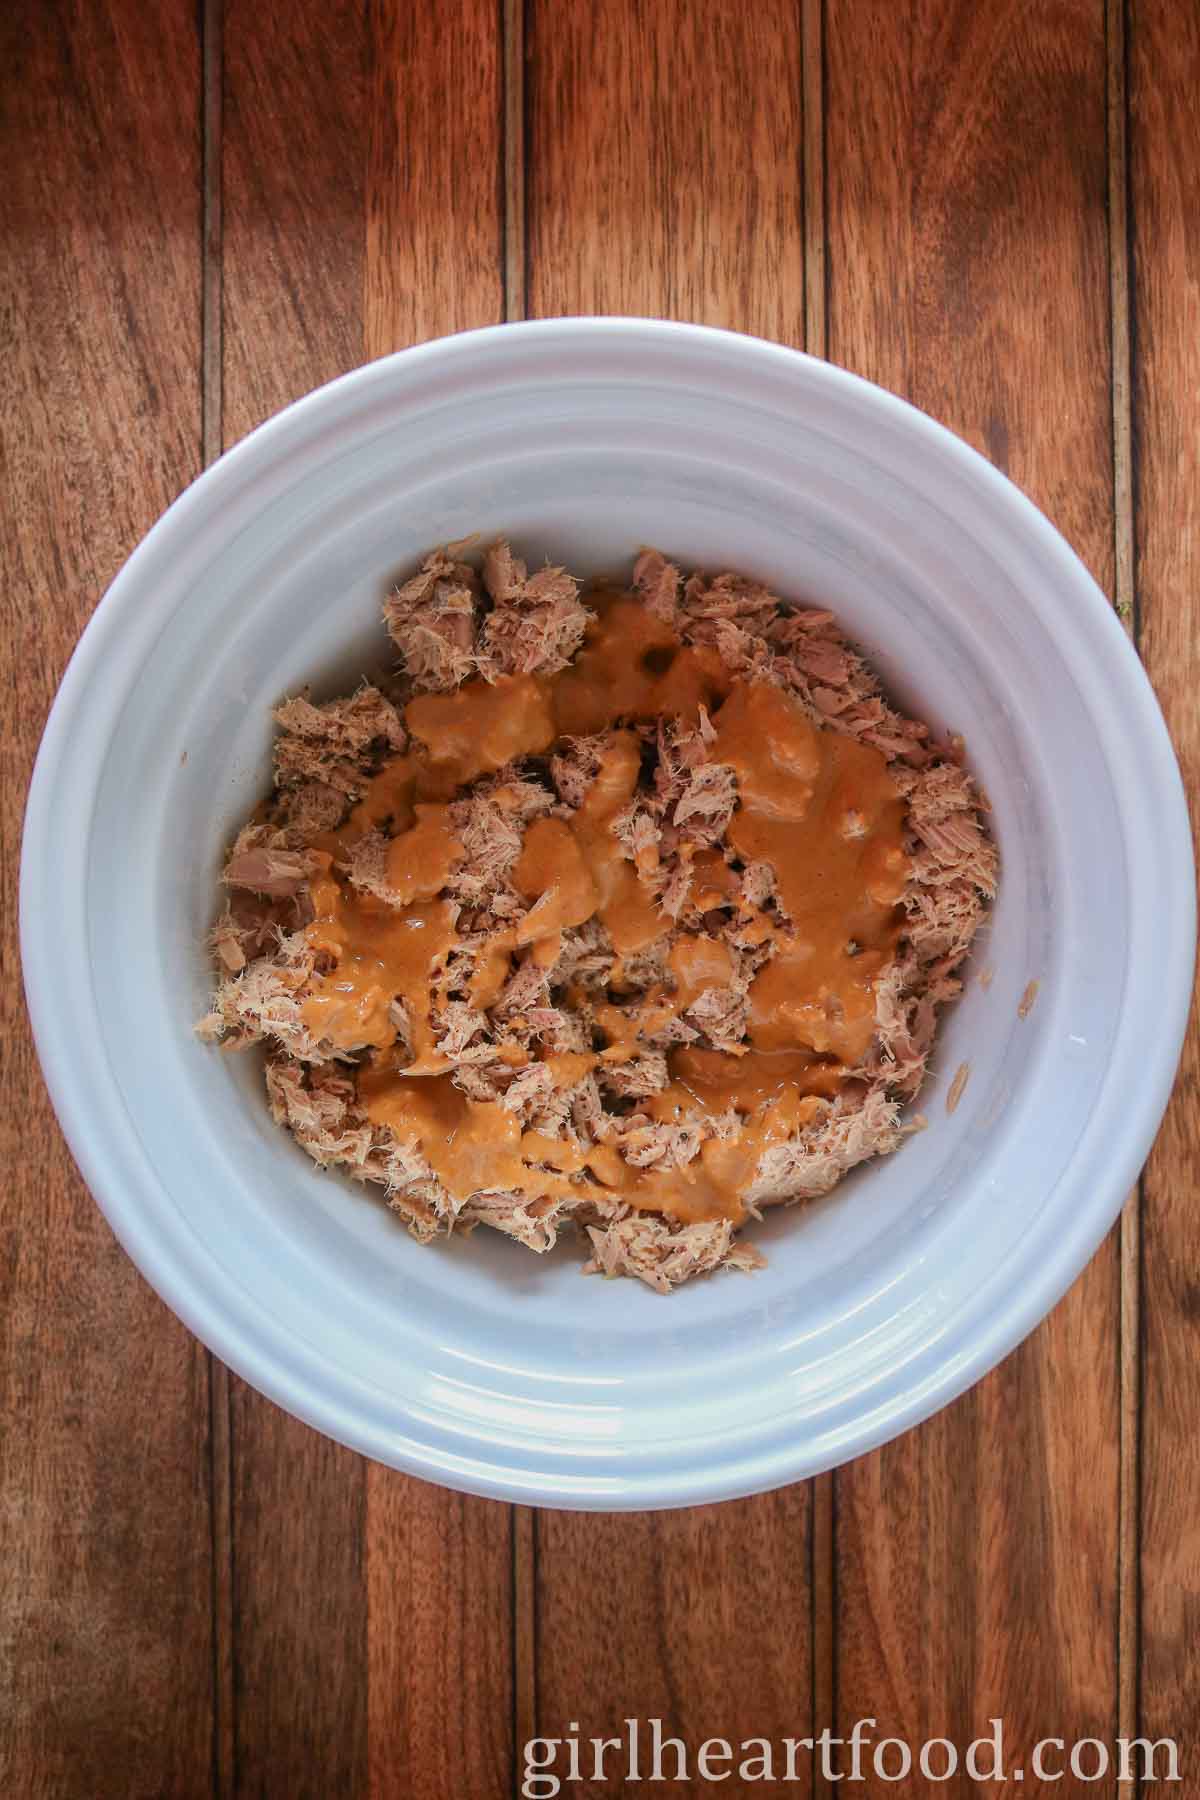 Canned tuna with peanut sauce in a white bowl.